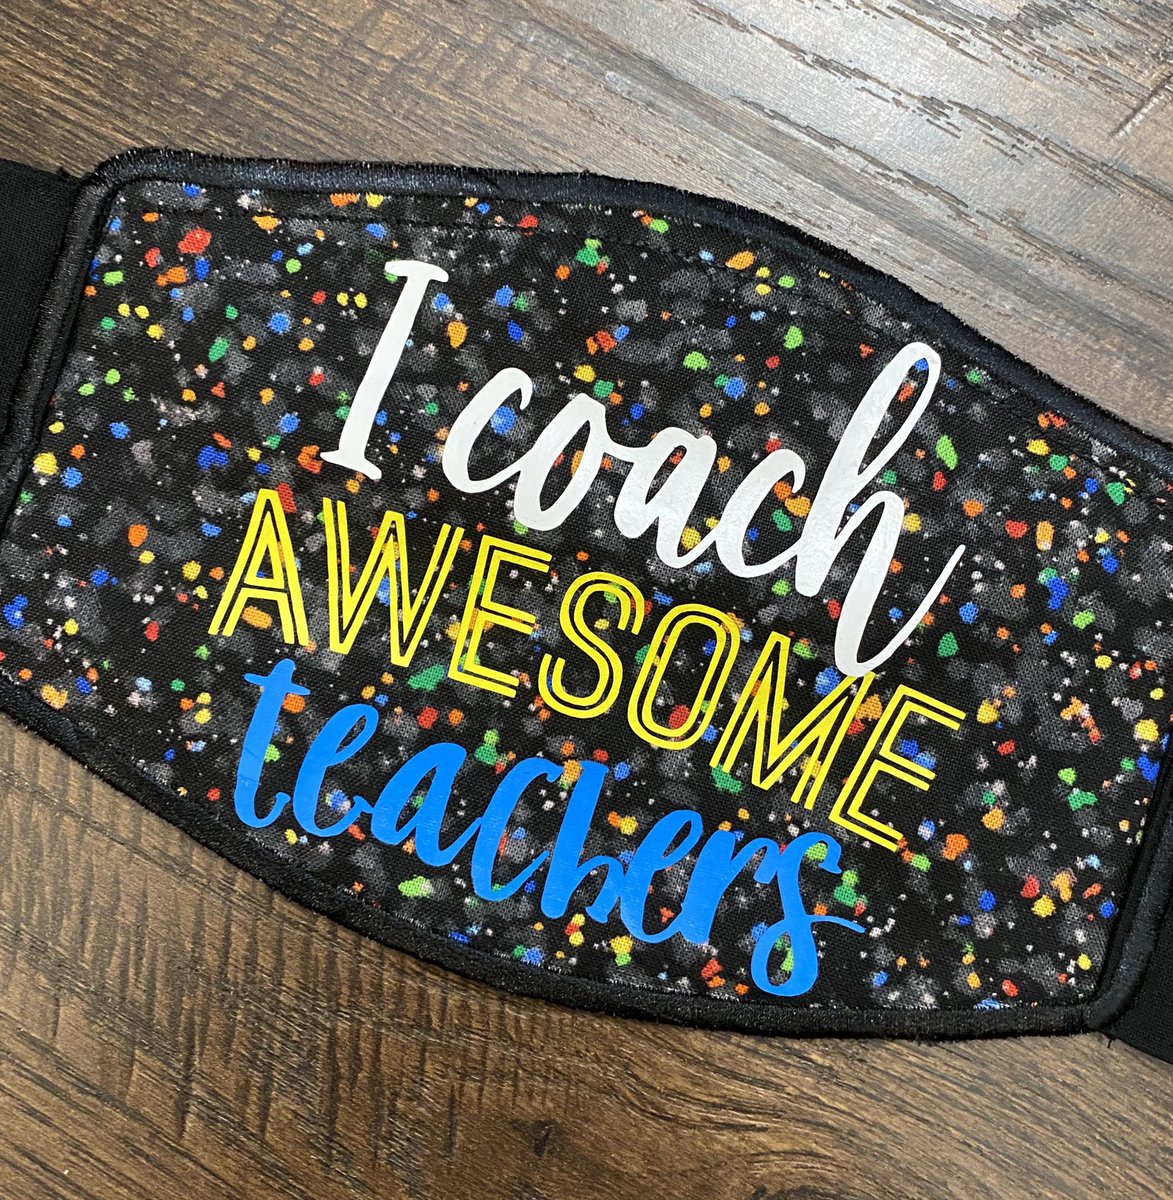 Getting ready for the new school year! etsy.me/31GnGBc #instructionalcoach #academiccoach #educoach #ETcoach @jimknight99 @SolutionTree @InstrCoachesGPS @mikemattos65 @brandonhrelle @GeauxMattReher @AmericanReading #theimpactcycle